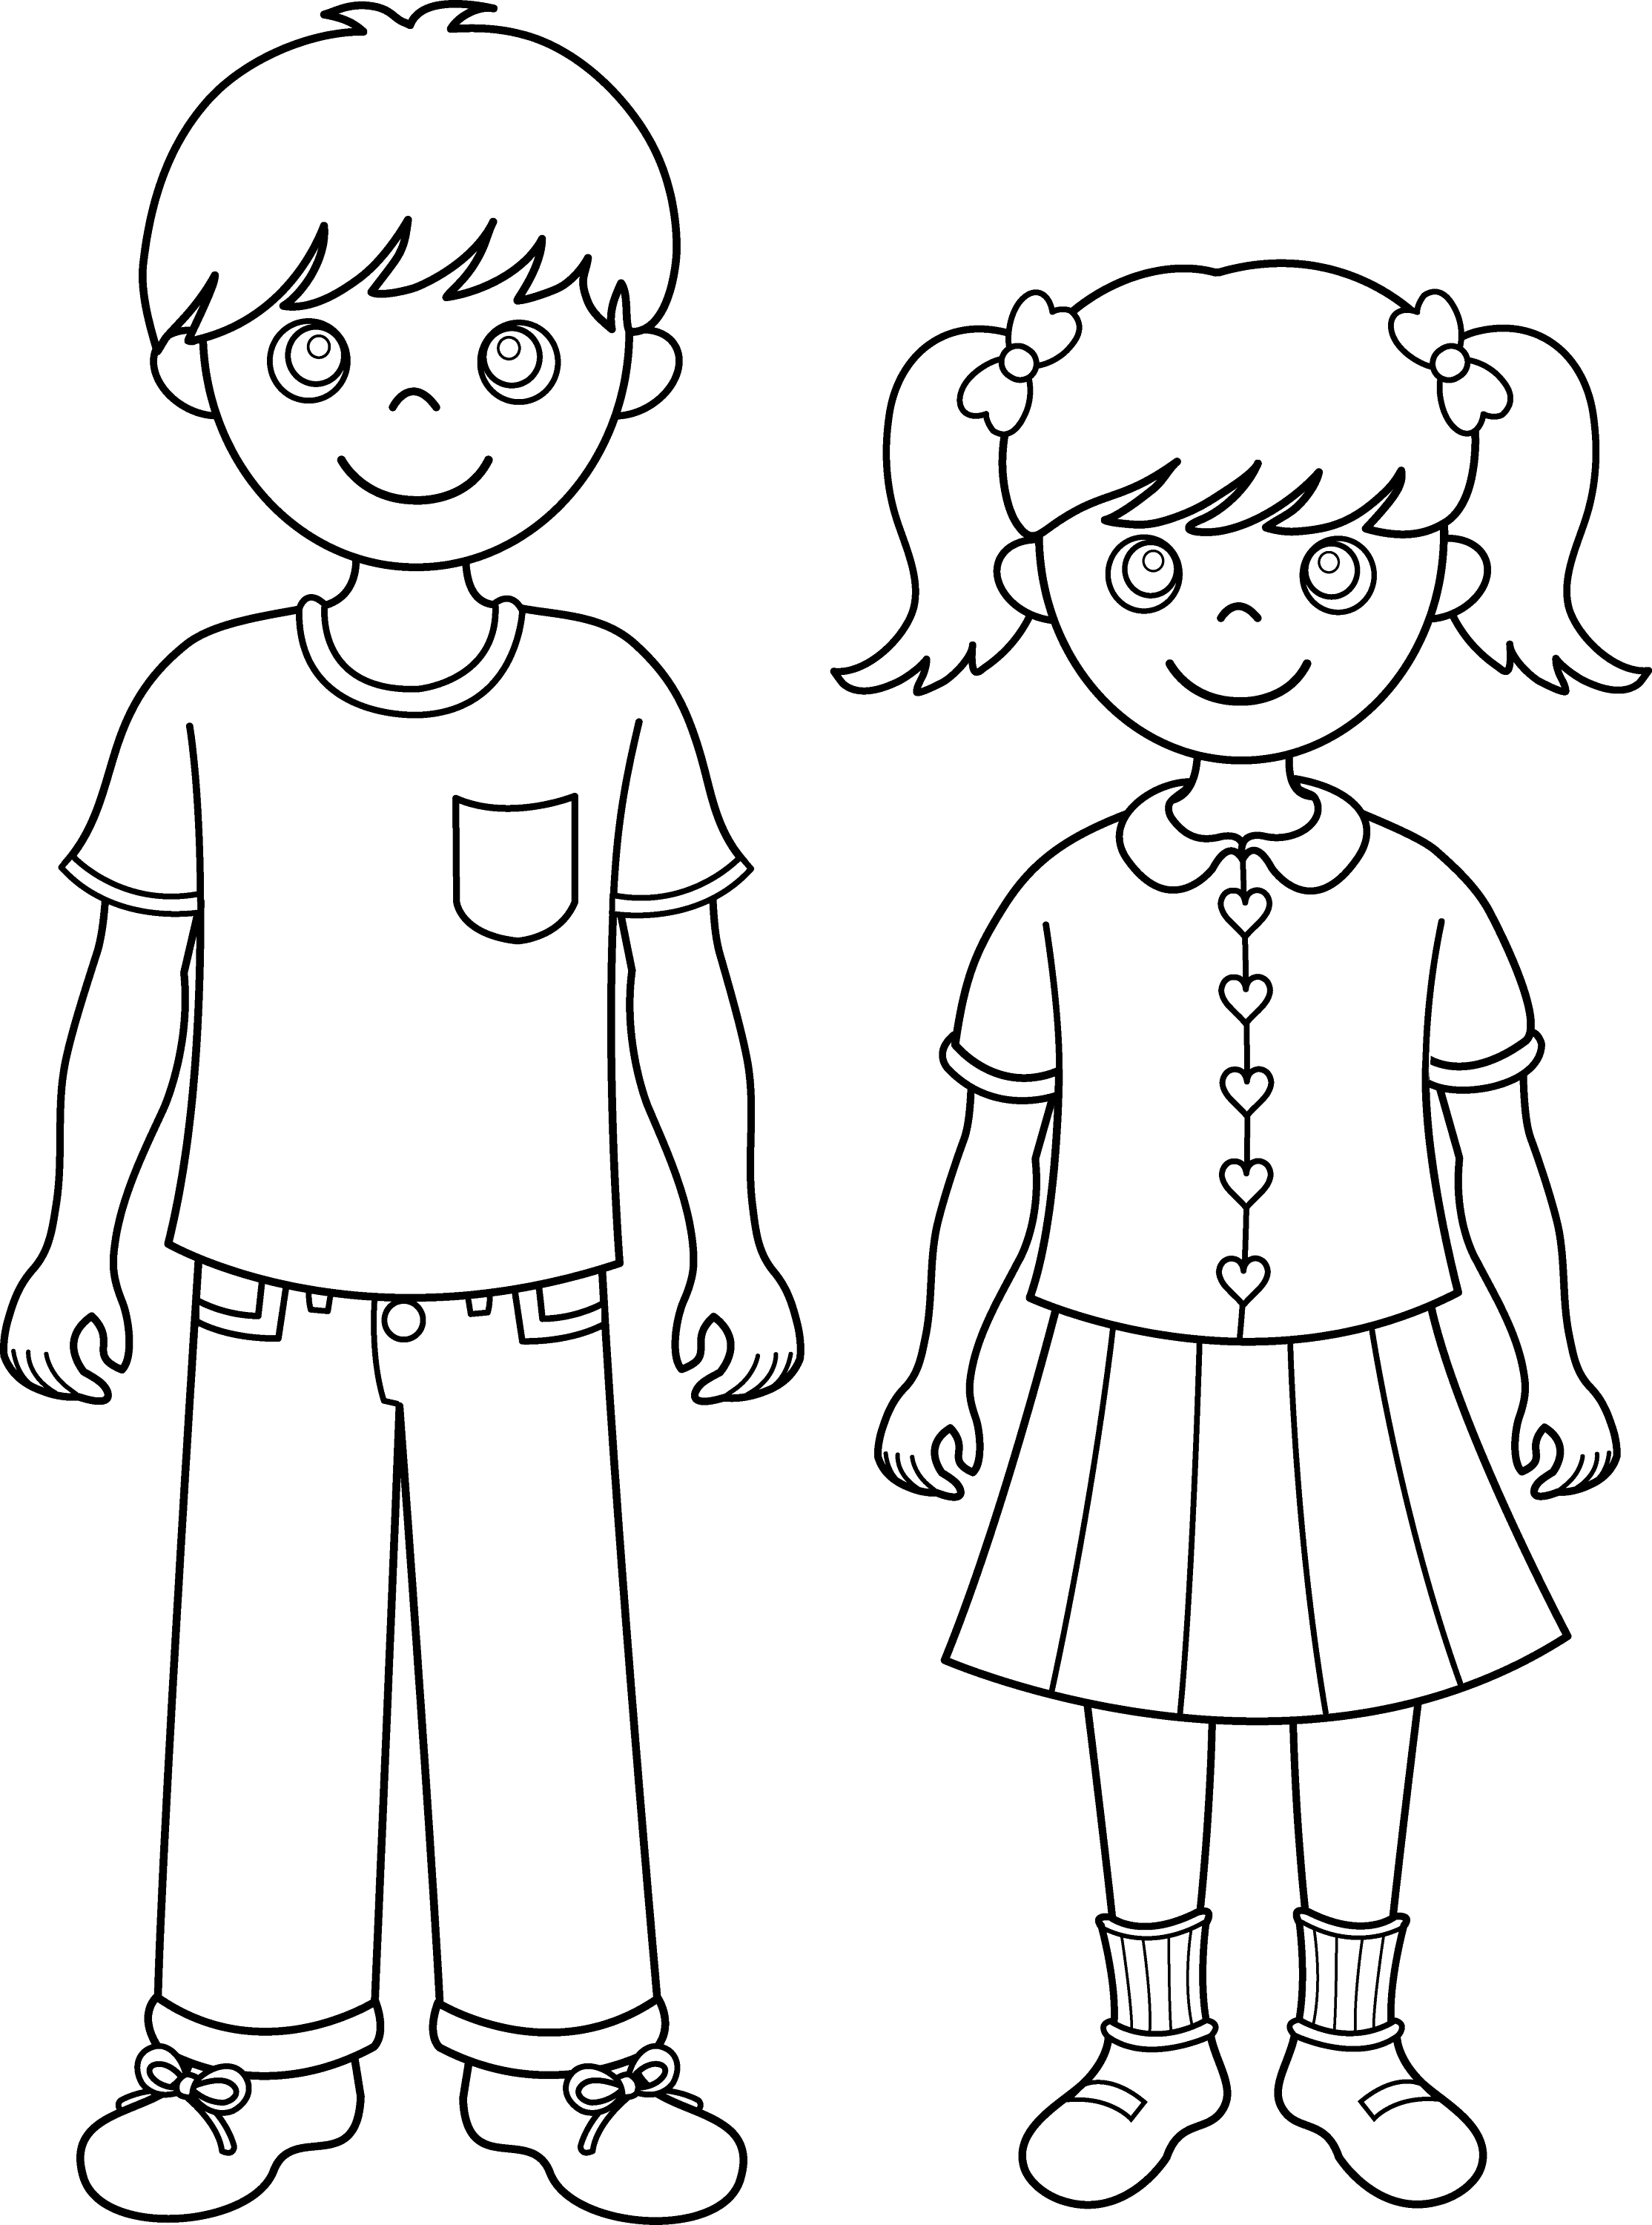 clipart of brother and sister - photo #38